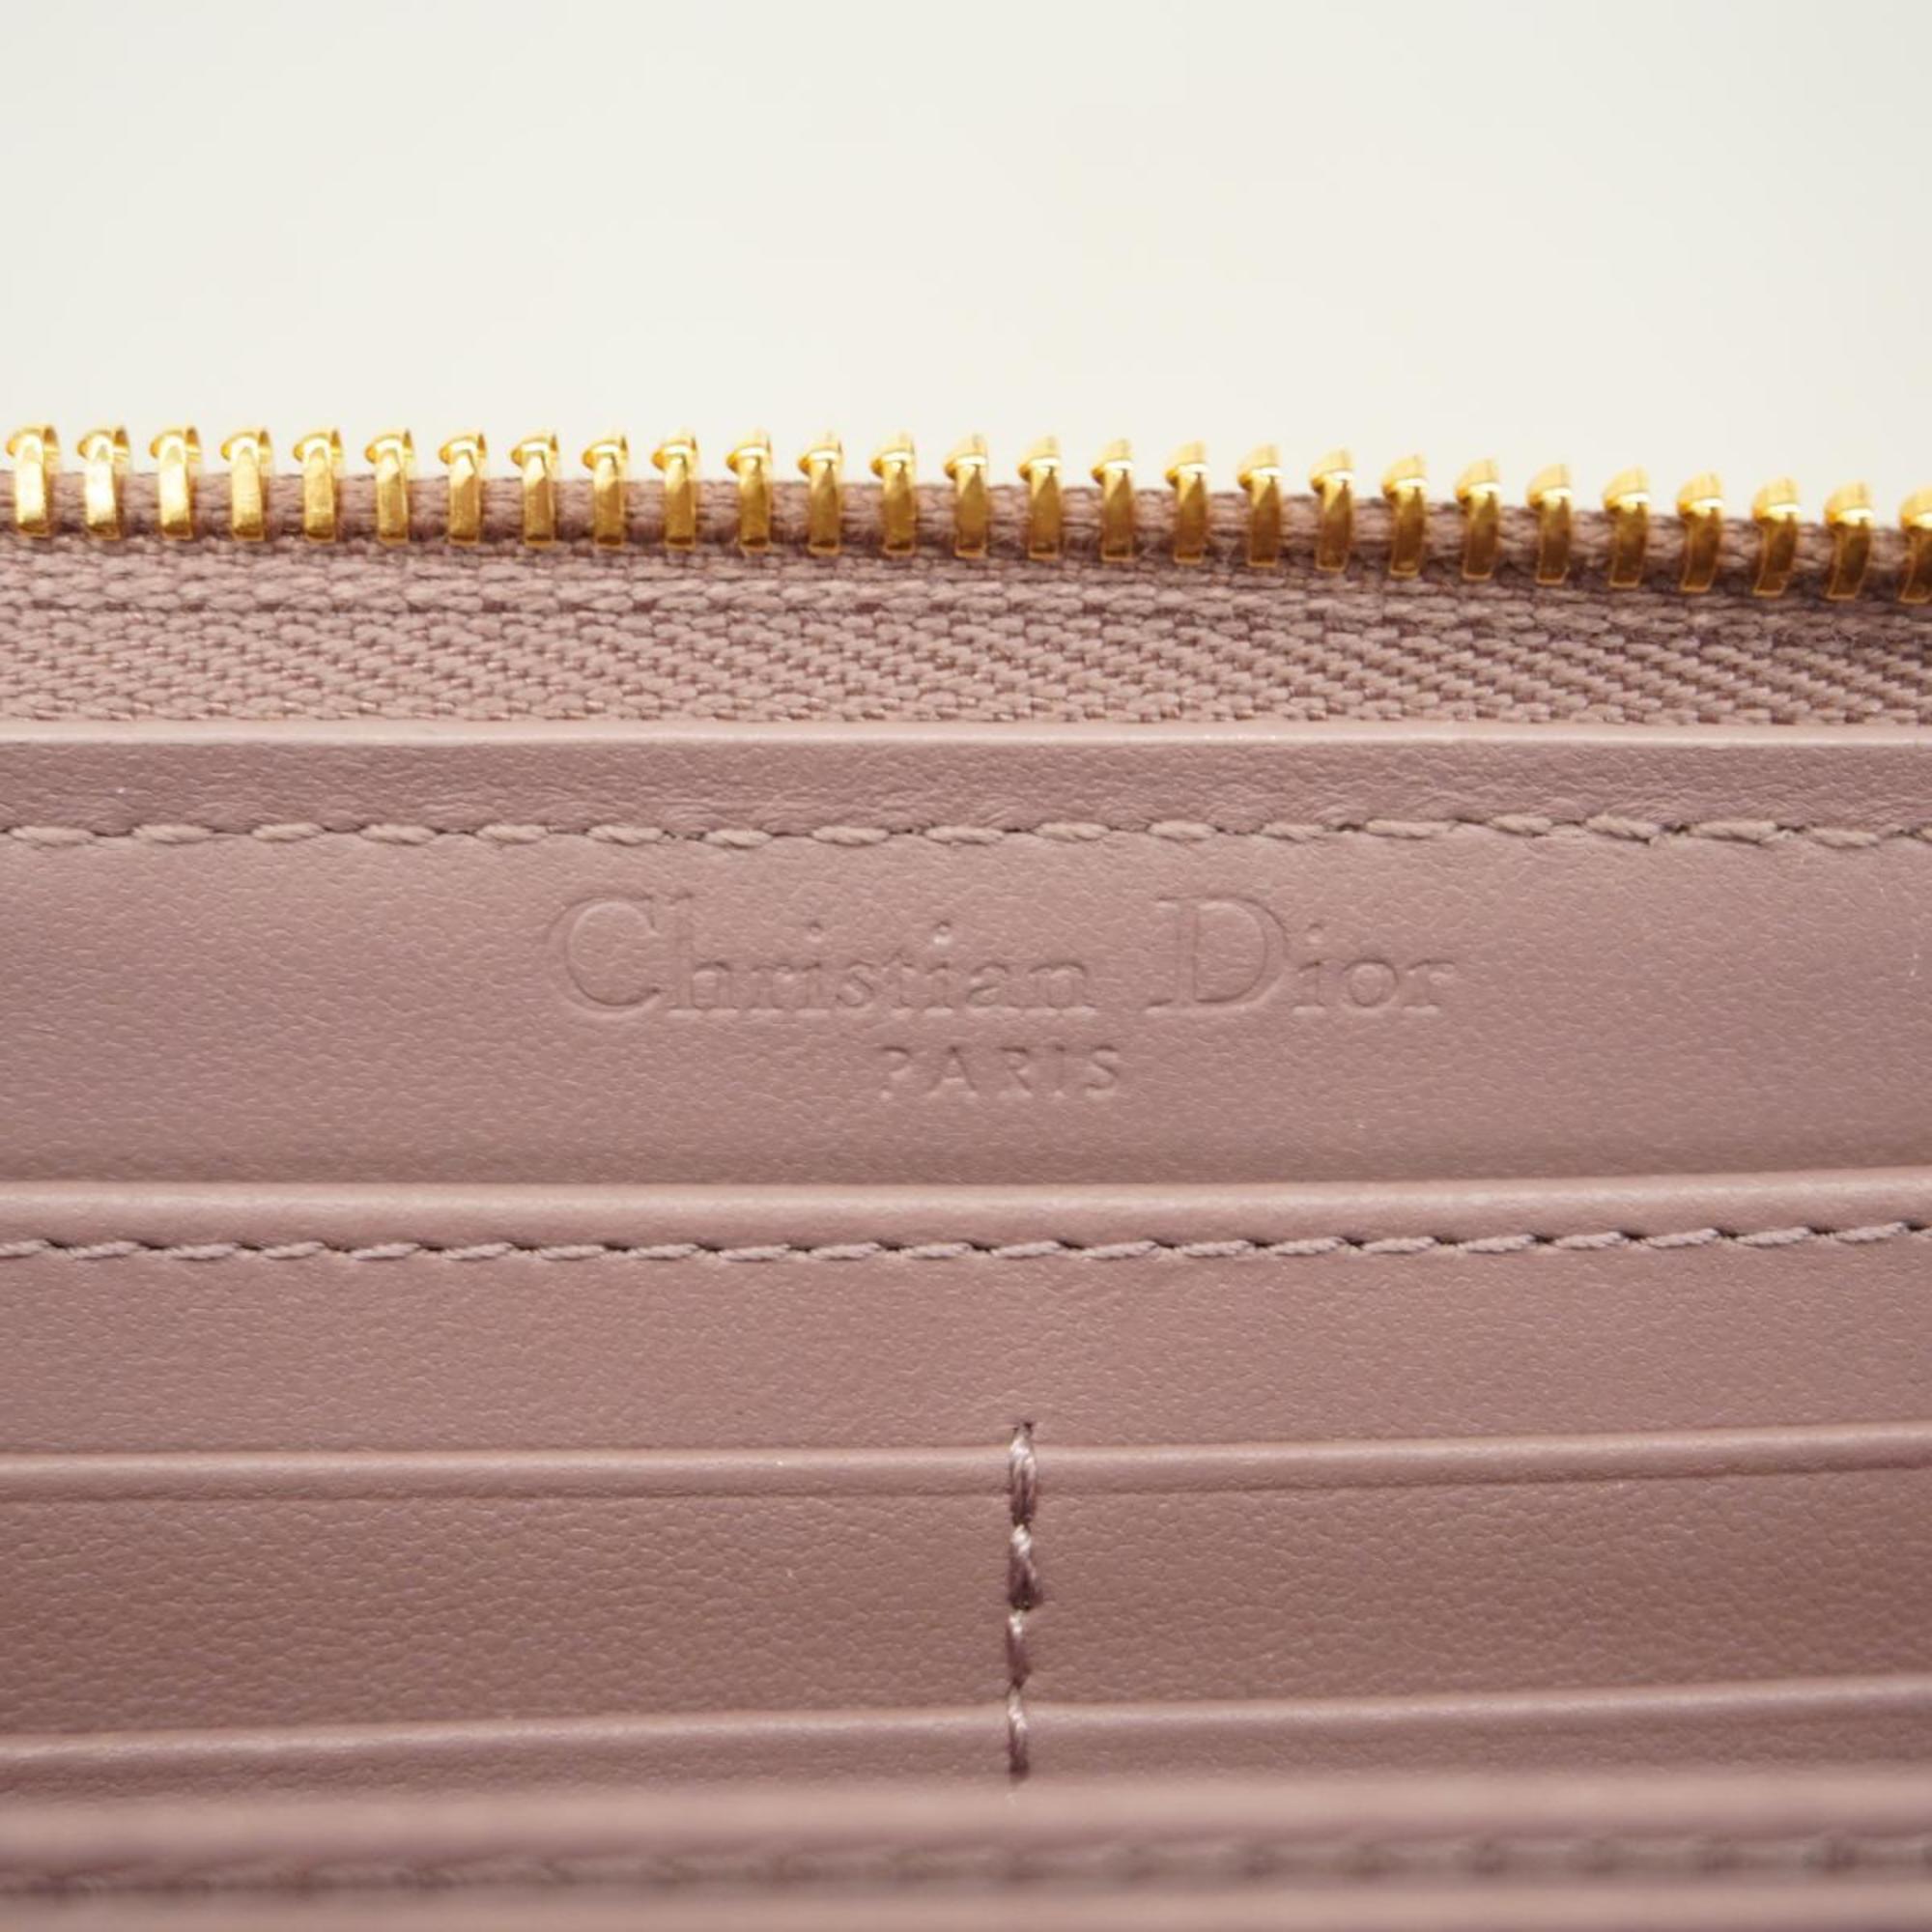 Christian Dior Long Wallet Cannage Leather Purple Women's